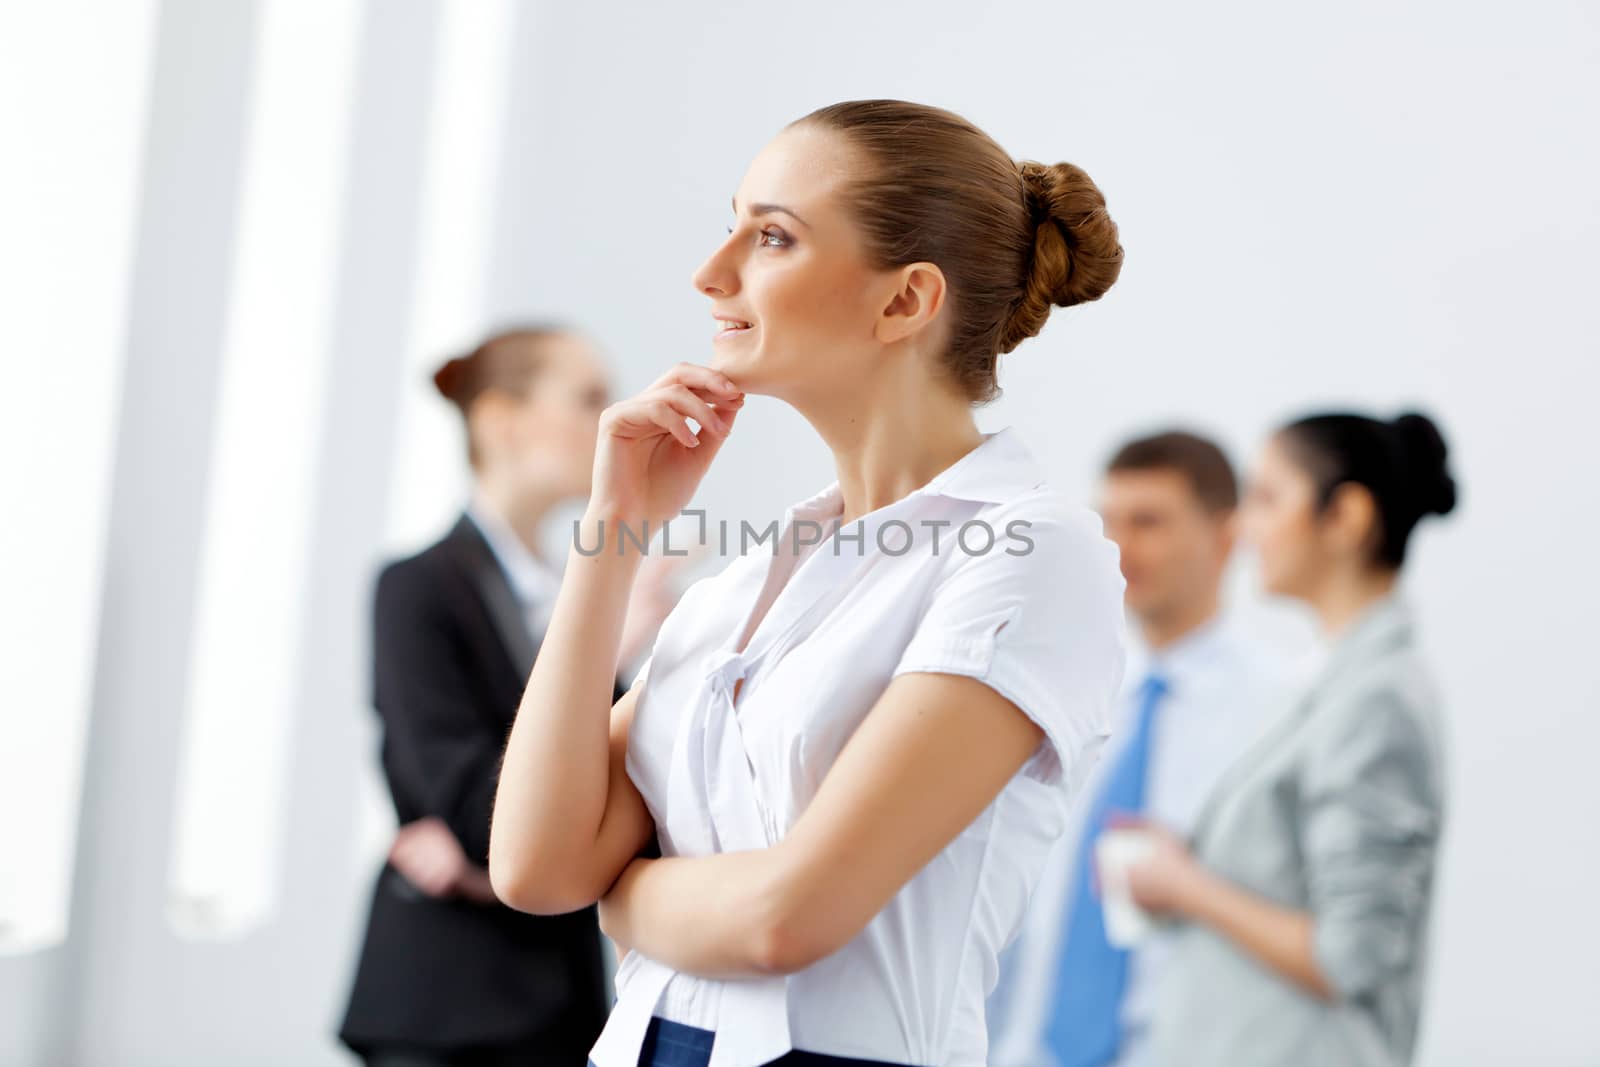 Image of four pretty young businesswomen standing in row